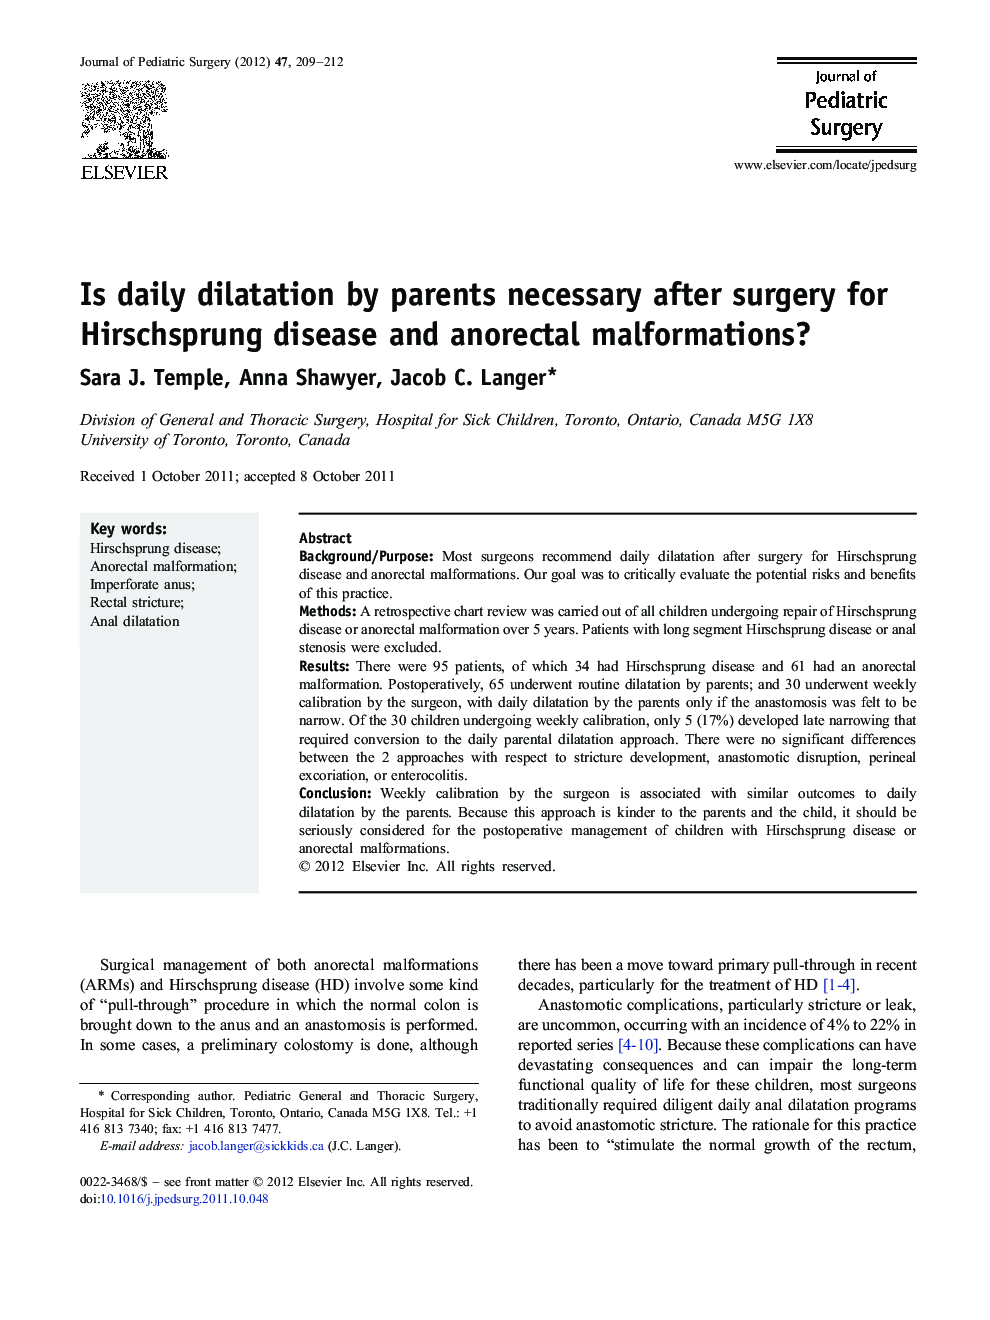 Is daily dilatation by parents necessary after surgery for Hirschsprung disease and anorectal malformations?